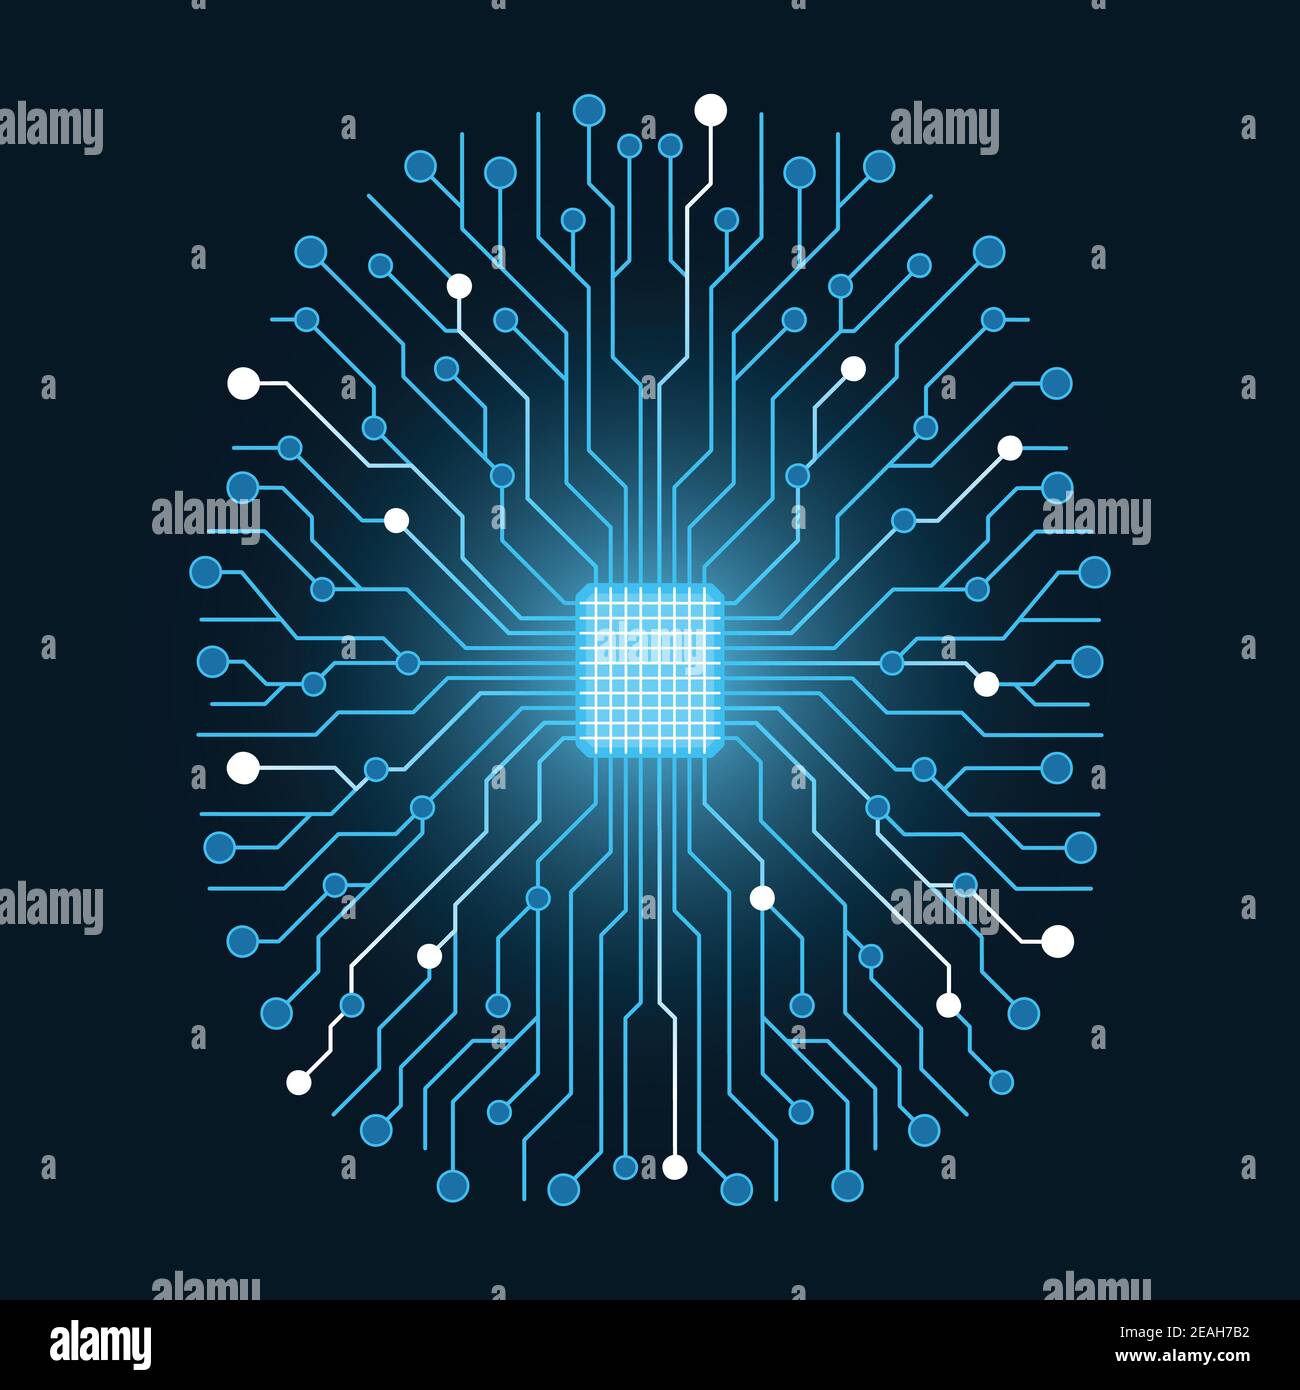 Vector illustration artificial intelligence. Microchip and brain shaped connections. Stock Vector